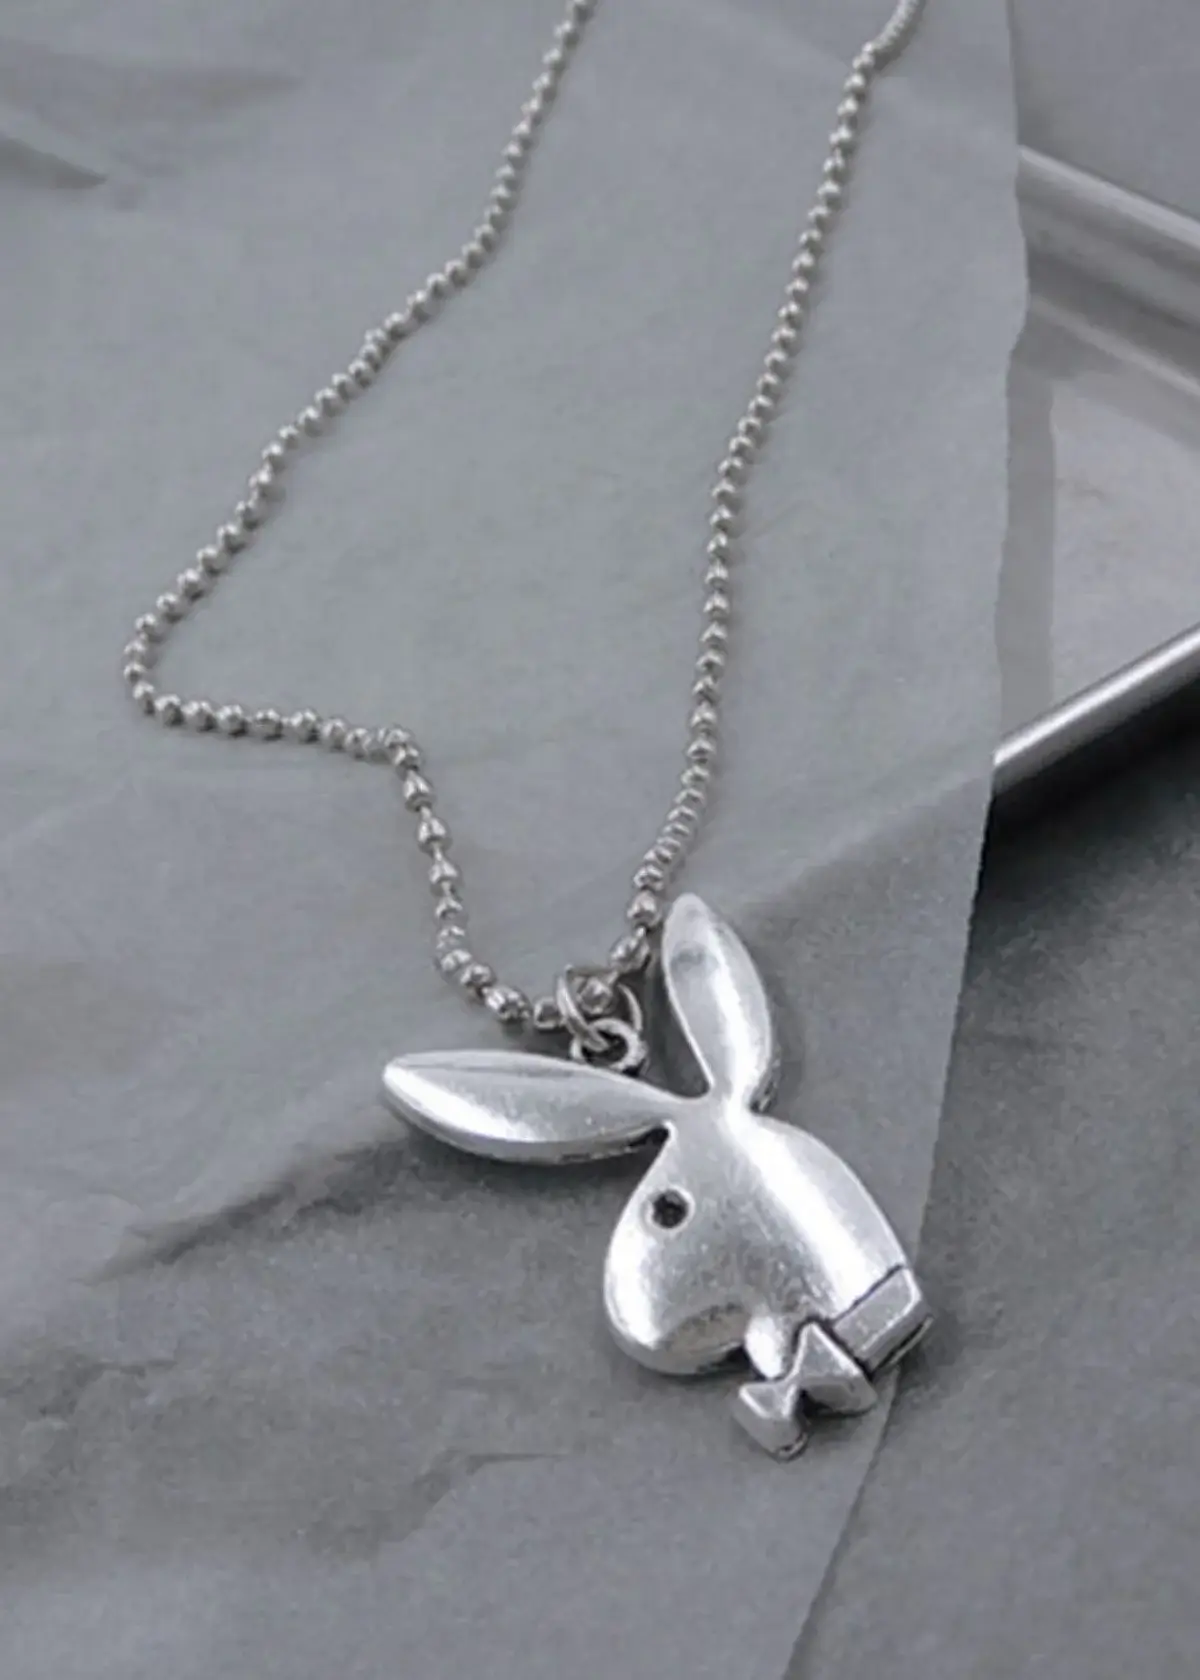 What materials are used to make bunny necklaces?